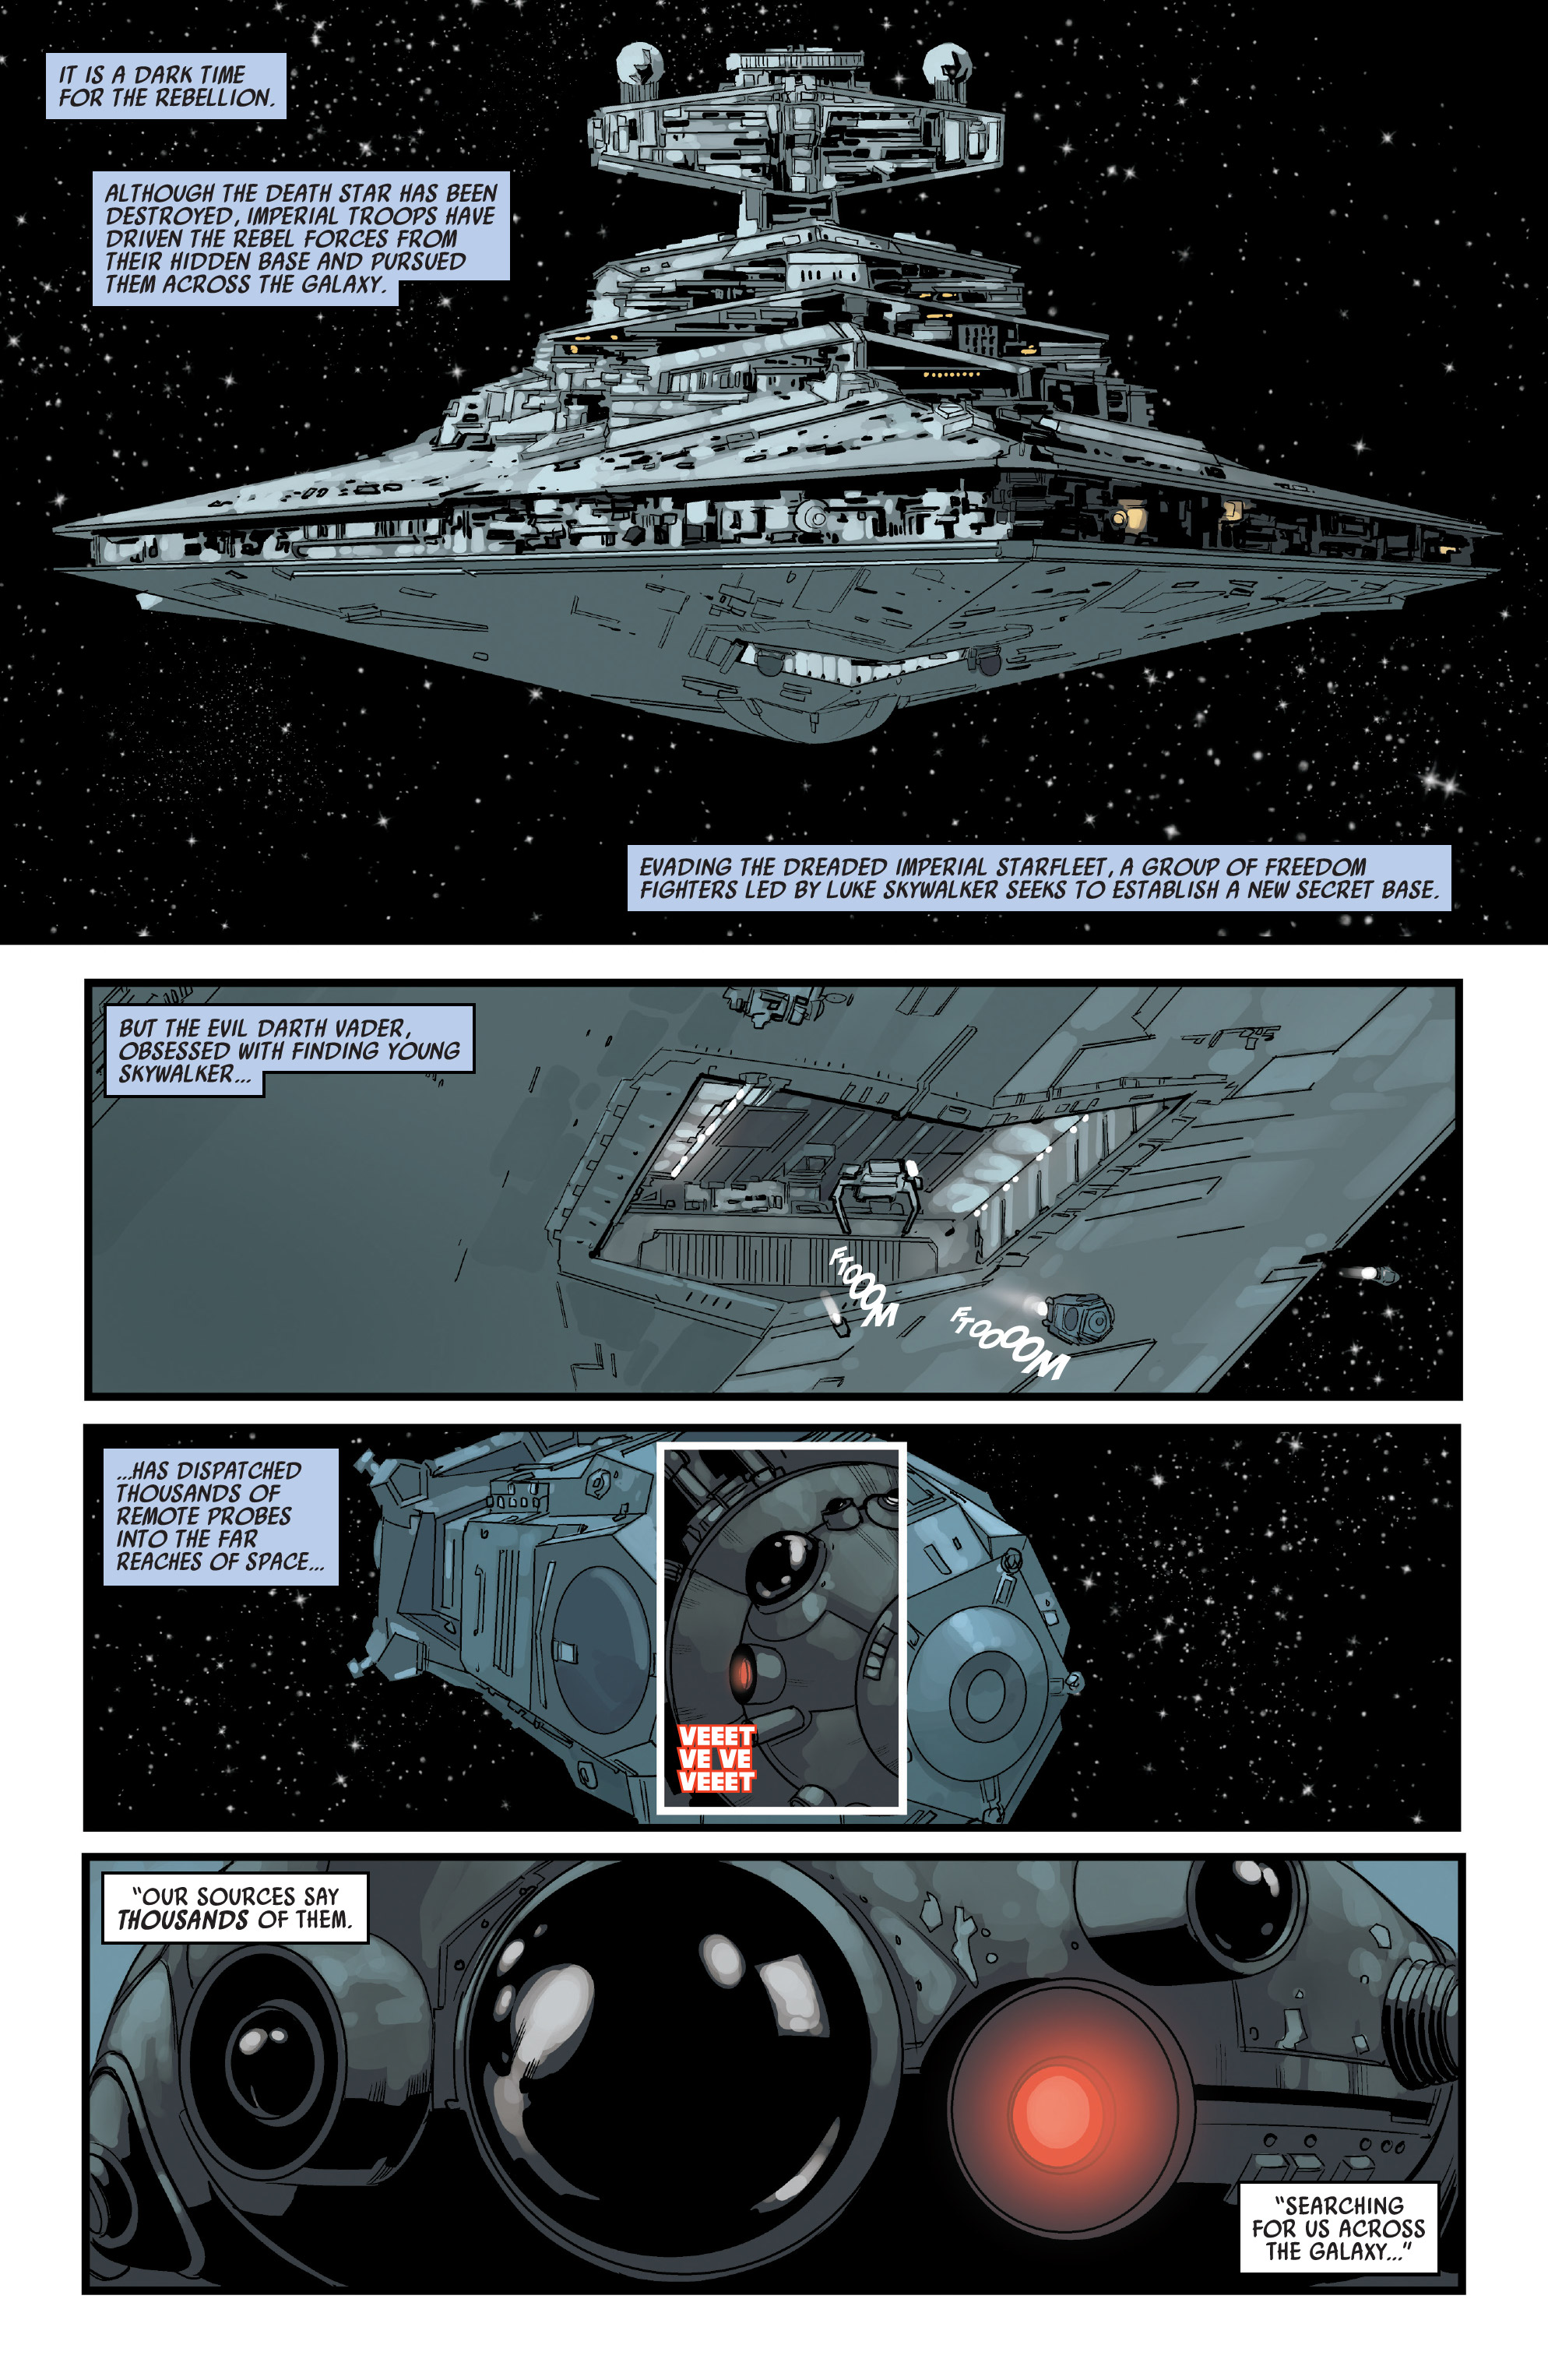 Star Wars (2015-): Chapter 68 - Page 3